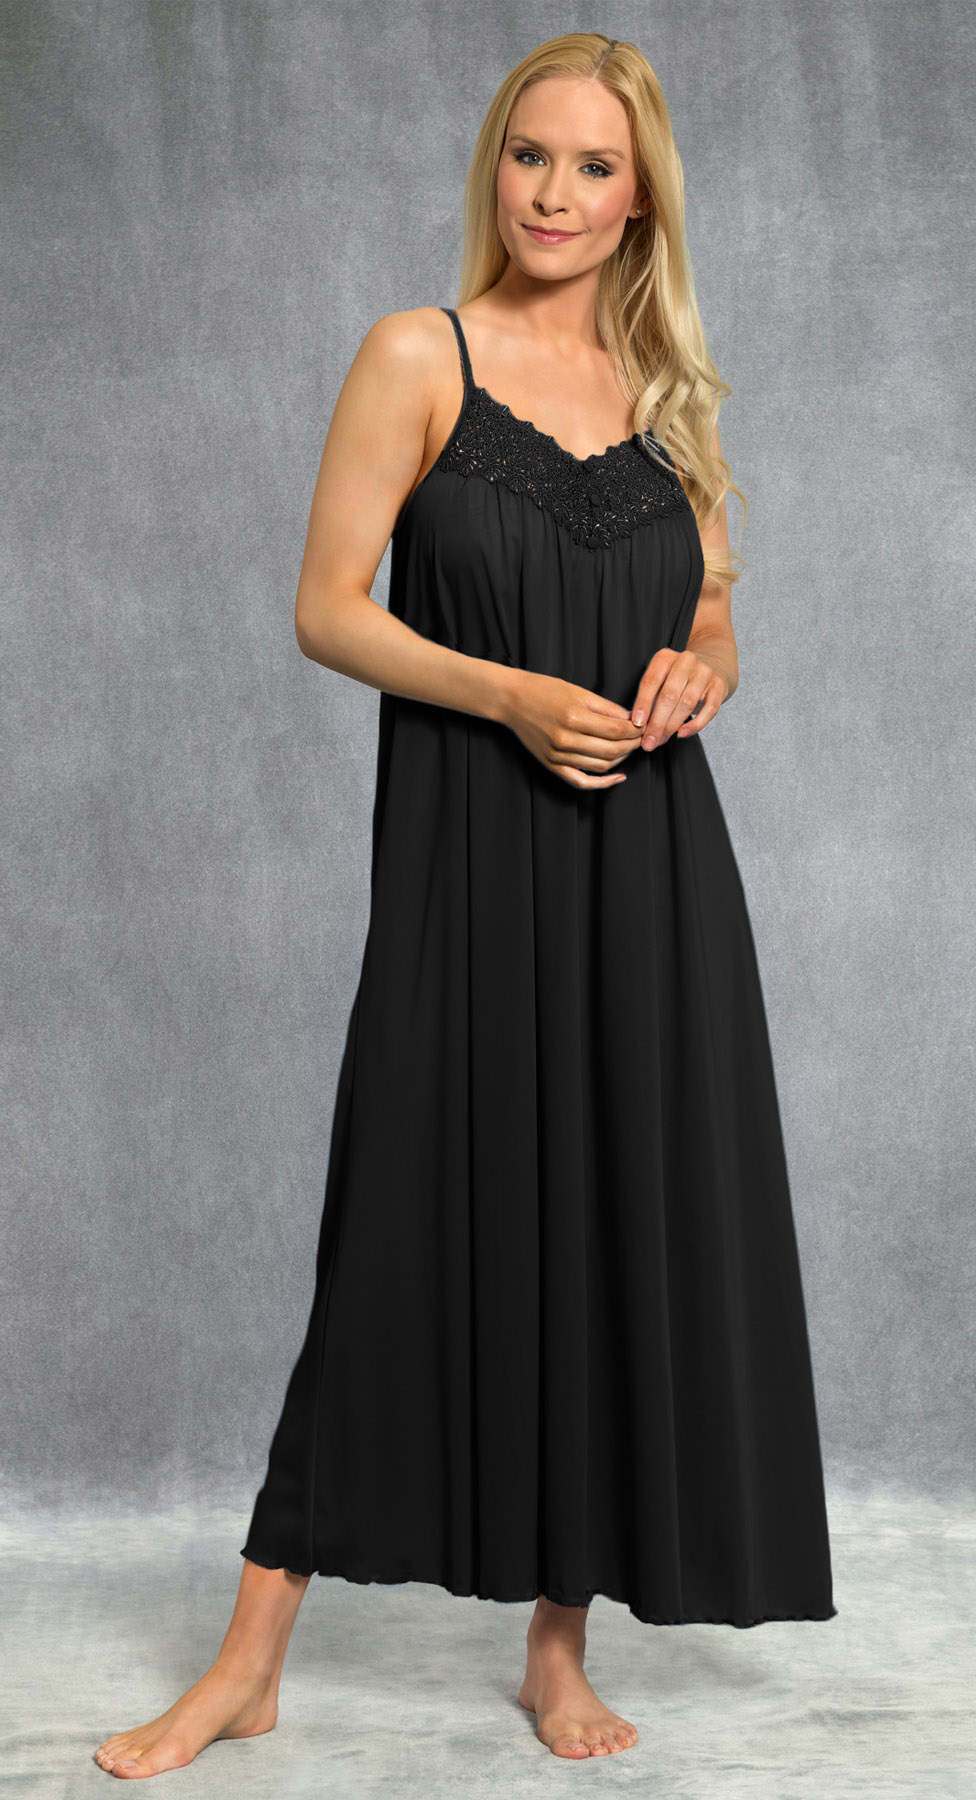 Women's Full Silp Dress with Built in Bra Spaghetti Nightgown Long